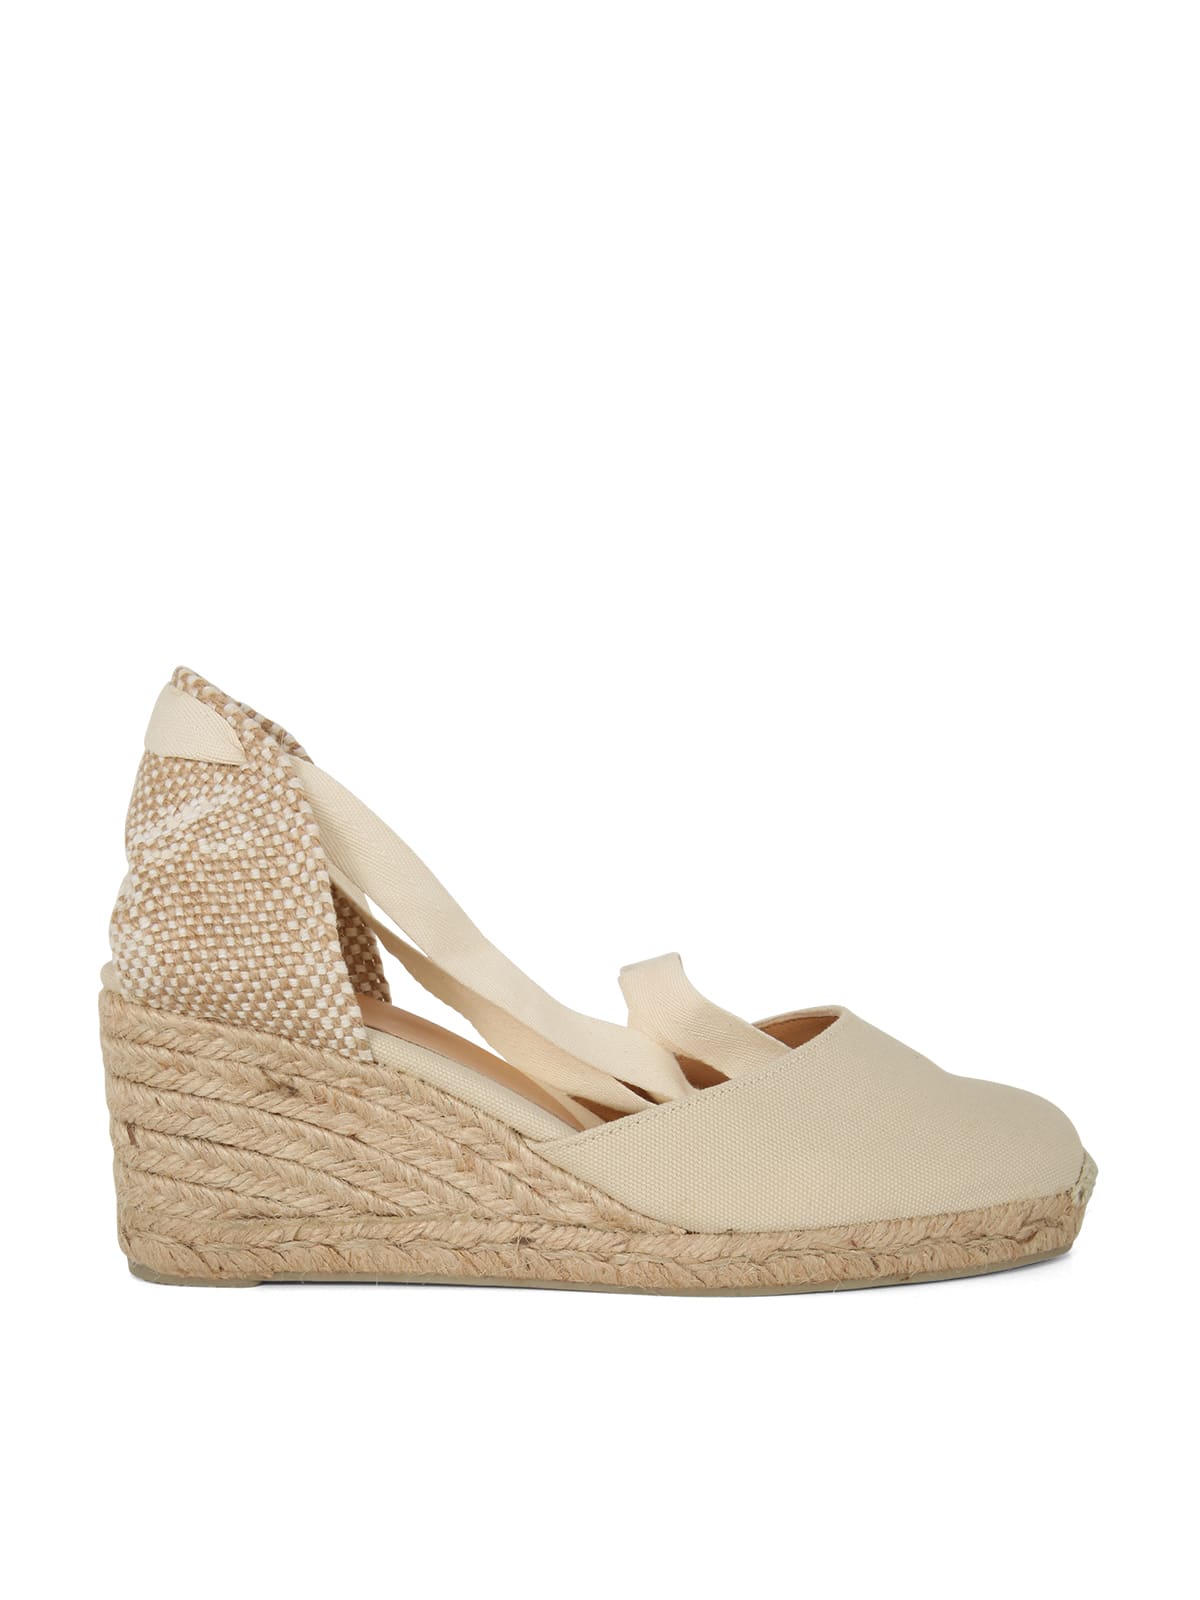 Castañer Carina Espadrilles Wedge Sandal With Ankle Laces